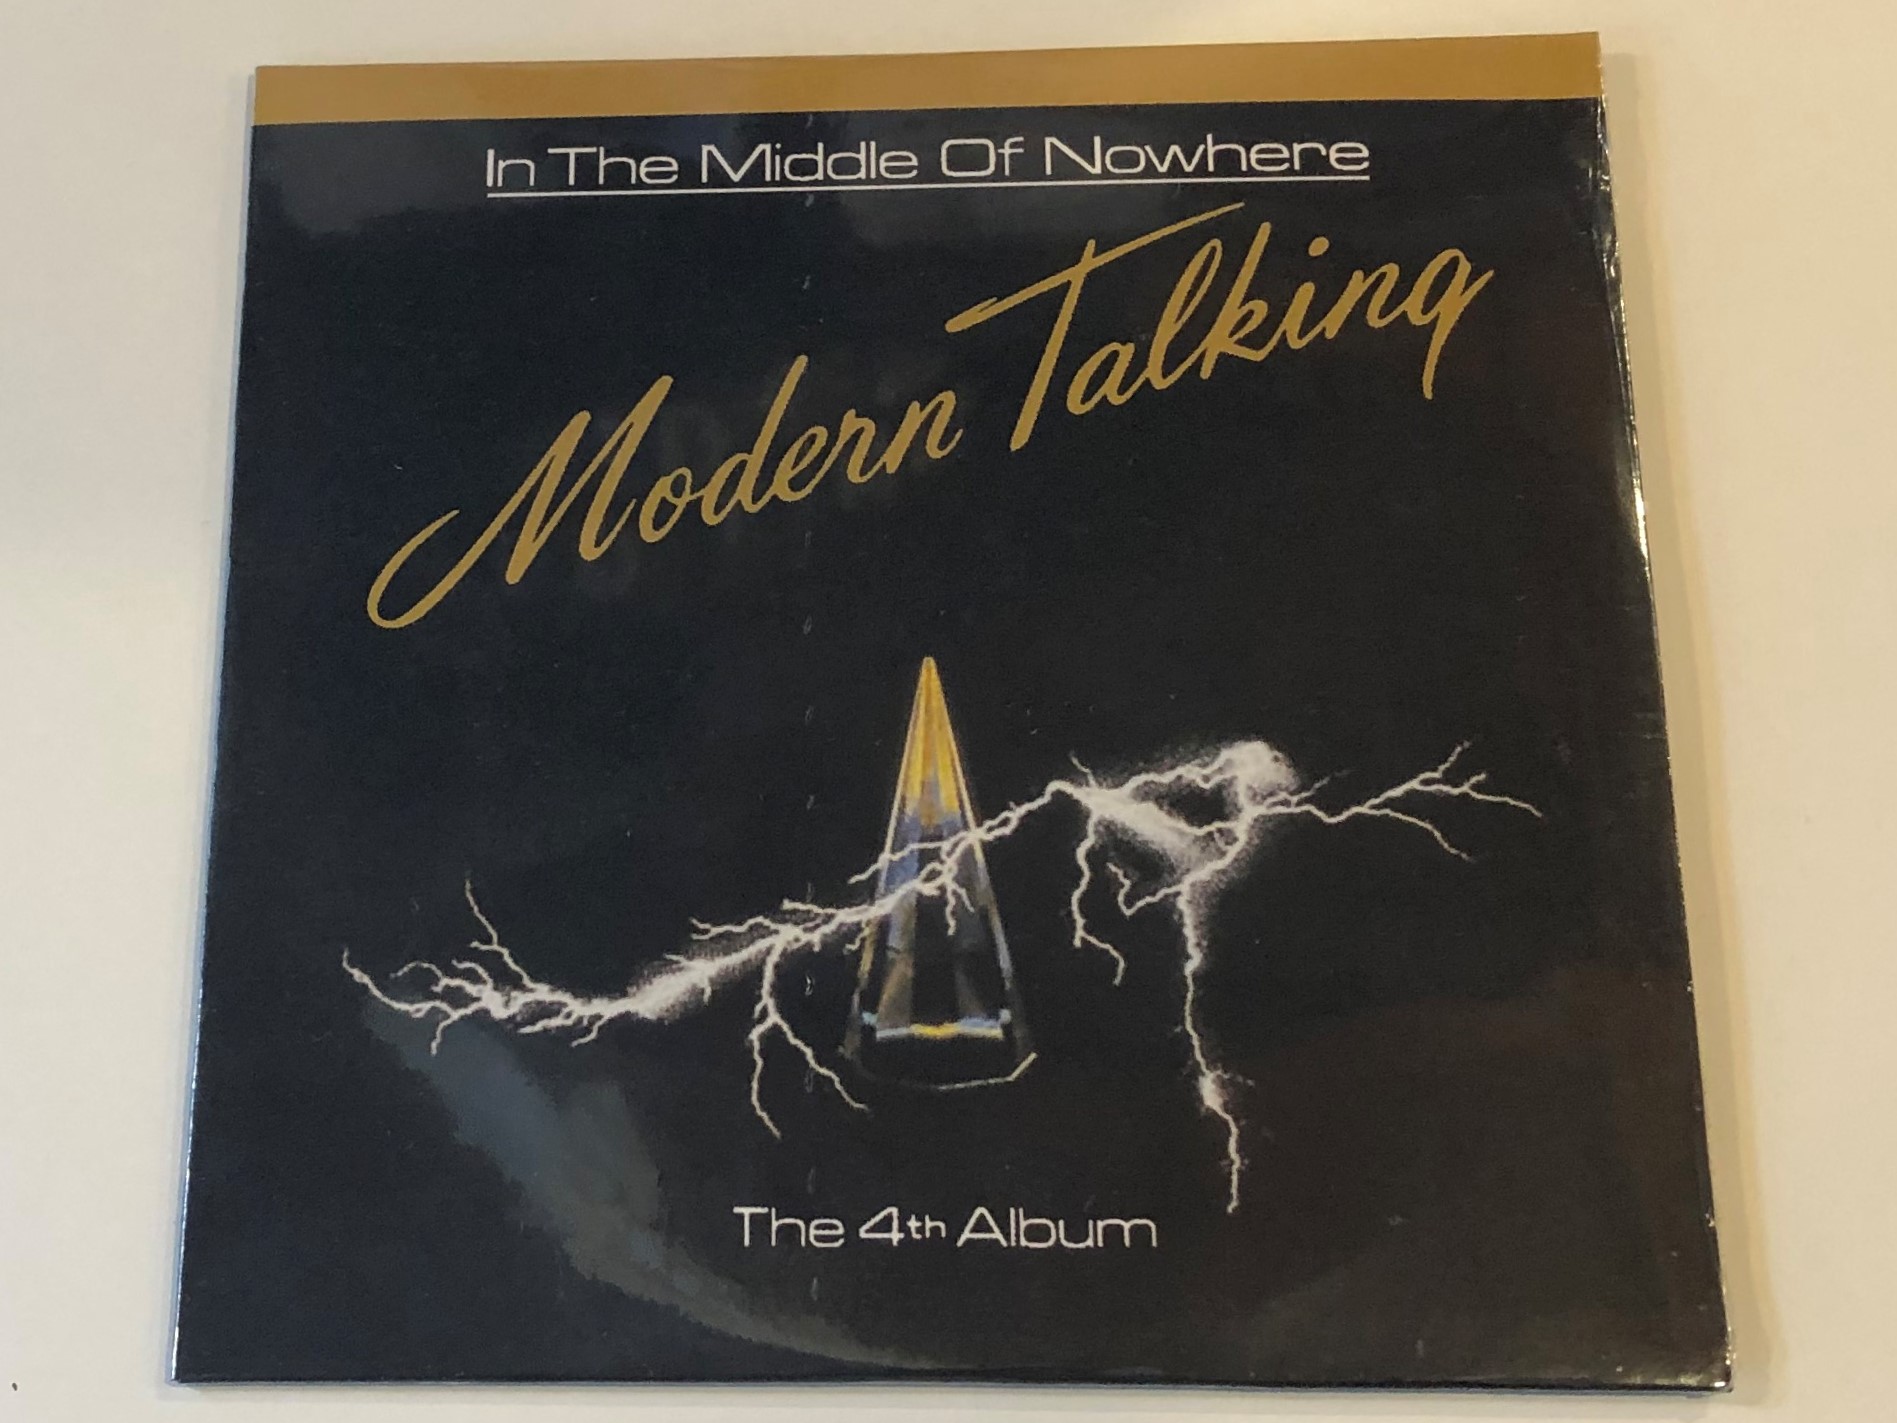 in-the-middle-of-nowhere-modern-talking-the-4th-album-sony-music-audio-cd-2010-88697758252-1-.jpg